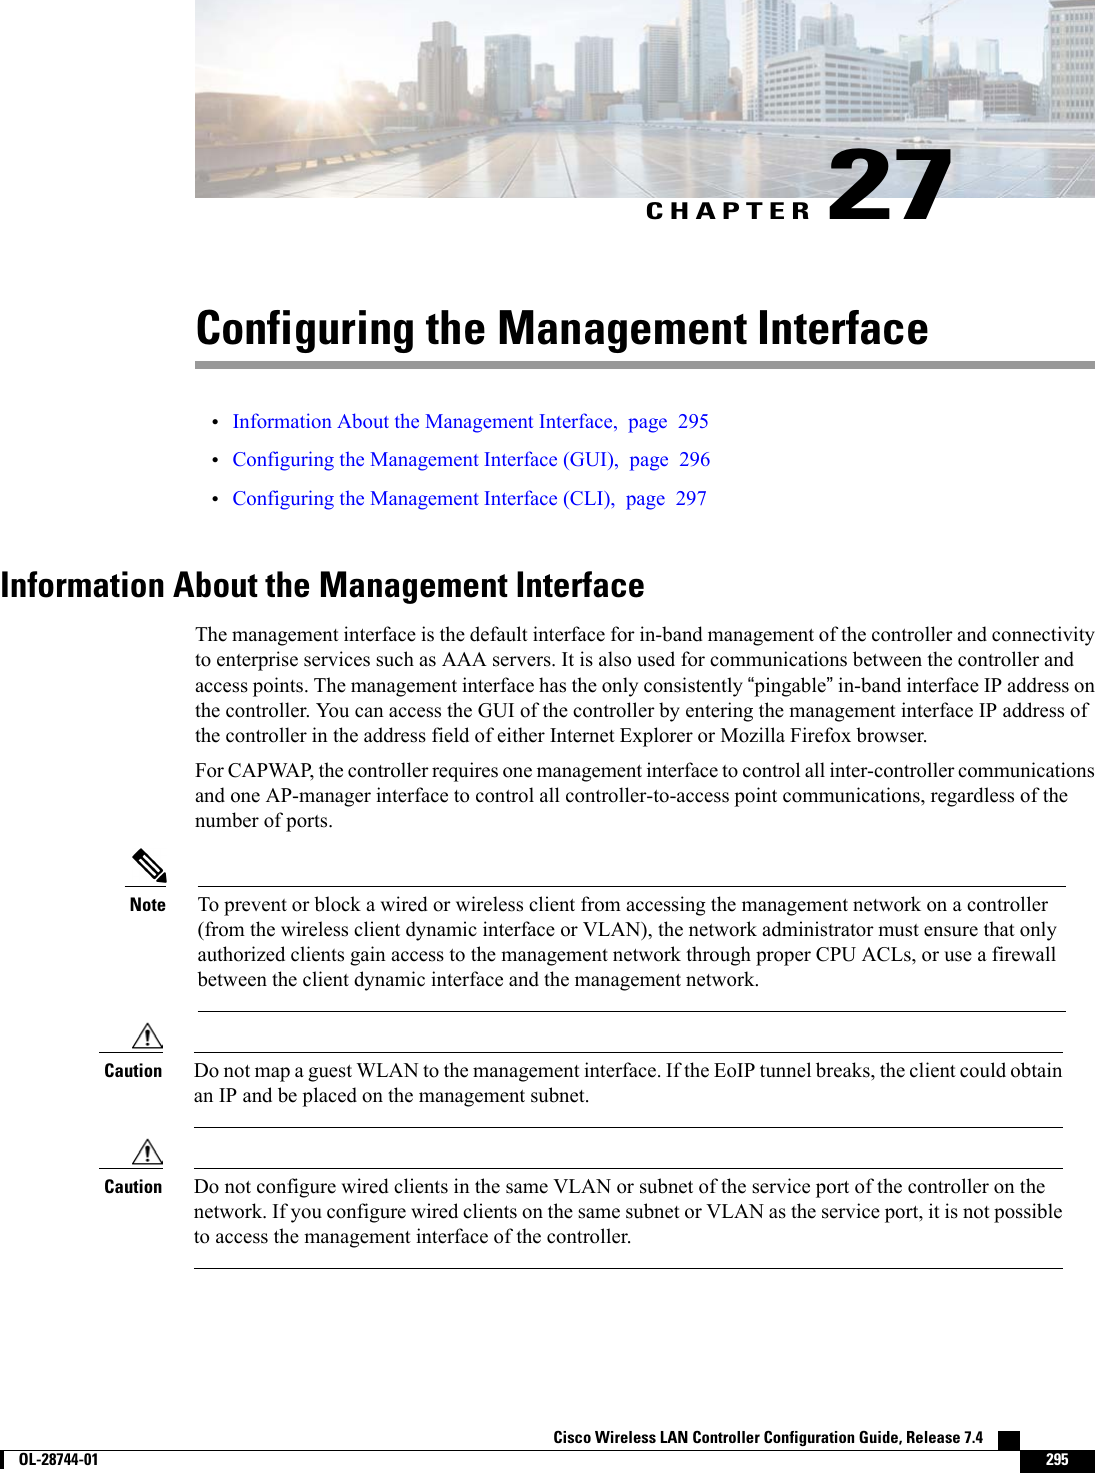 CHAPTER 27Configuring the Management Interface•Information About the Management Interface, page 295•Configuring the Management Interface (GUI), page 296•Configuring the Management Interface (CLI), page 297Information About the Management InterfaceThe management interface is the default interface for in-band management of the controller and connectivityto enterprise services such as AAA servers. It is also used for communications between the controller andaccess points. The management interface has the only consistently “pingable”in-band interface IP address onthe controller. You can access the GUI of the controller by entering the management interface IP address ofthe controller in the address field of either Internet Explorer or Mozilla Firefox browser.For CAPWAP, the controller requires one management interface to control all inter-controller communicationsand one AP-manager interface to control all controller-to-access point communications, regardless of thenumber of ports.To prevent or block a wired or wireless client from accessing the management network on a controller(from the wireless client dynamic interface or VLAN), the network administrator must ensure that onlyauthorized clients gain access to the management network through proper CPU ACLs, or use a firewallbetween the client dynamic interface and the management network.NoteDo not map a guest WLAN to the management interface. If the EoIP tunnel breaks, the client could obtainan IP and be placed on the management subnet.CautionDo not configure wired clients in the same VLAN or subnet of the service port of the controller on thenetwork. If you configure wired clients on the same subnet or VLAN as the service port, it is not possibleto access the management interface of the controller.CautionCisco Wireless LAN Controller Configuration Guide, Release 7.4        OL-28744-01 295